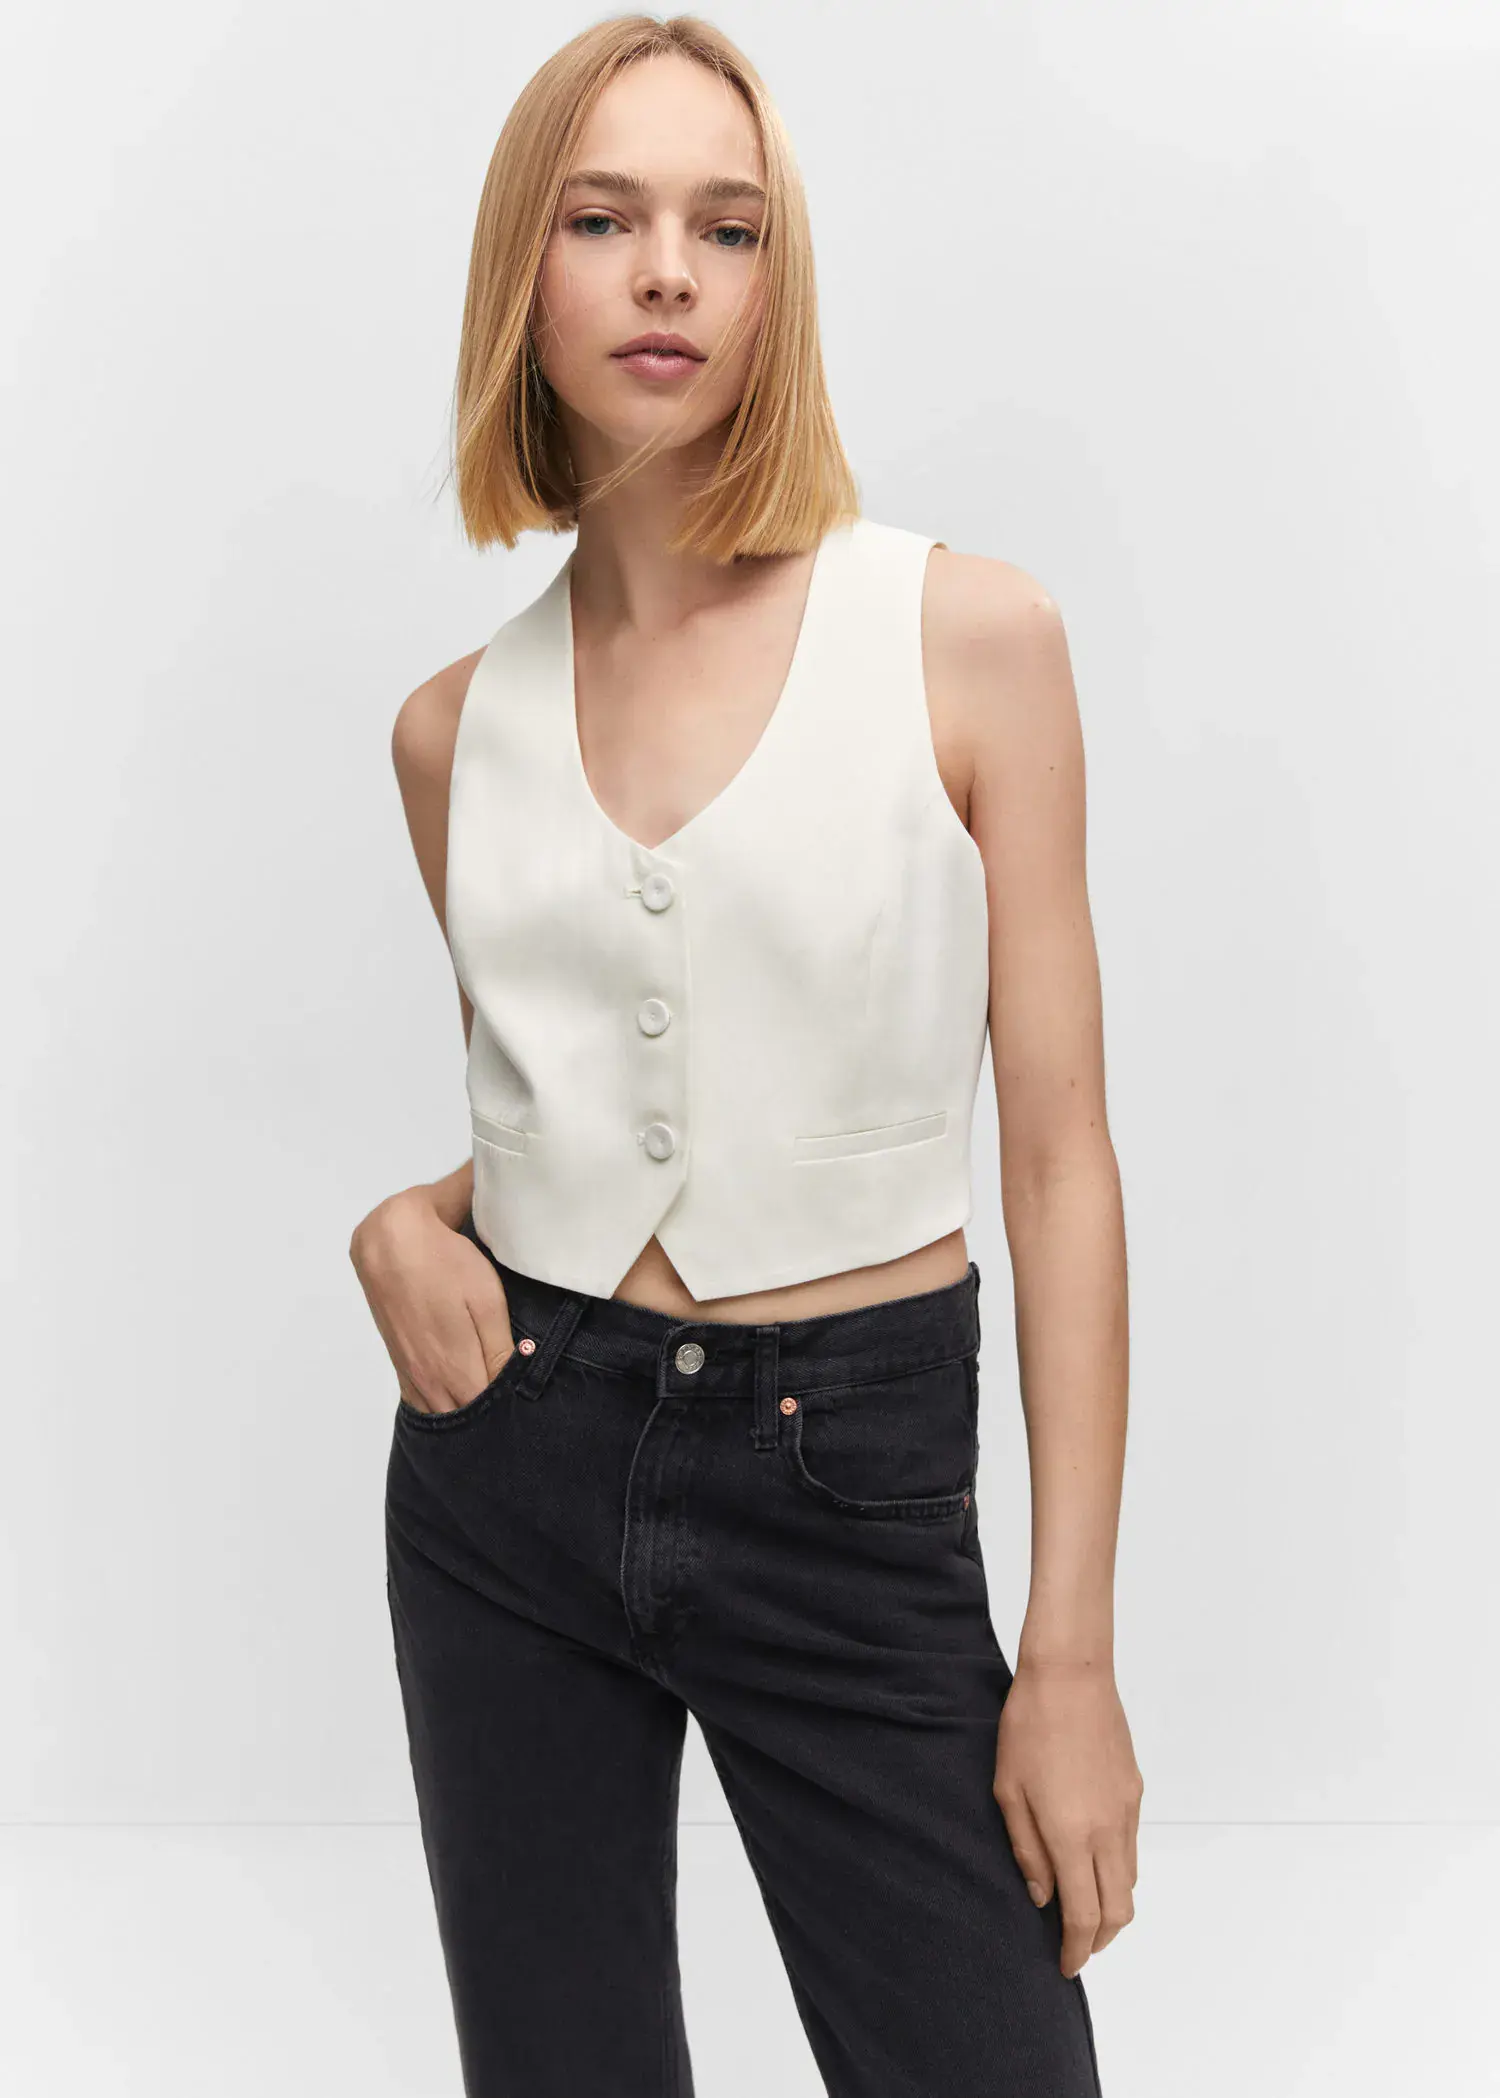 Mango Fitted gilet with buttons. a woman wearing a white vest and black jeans. 